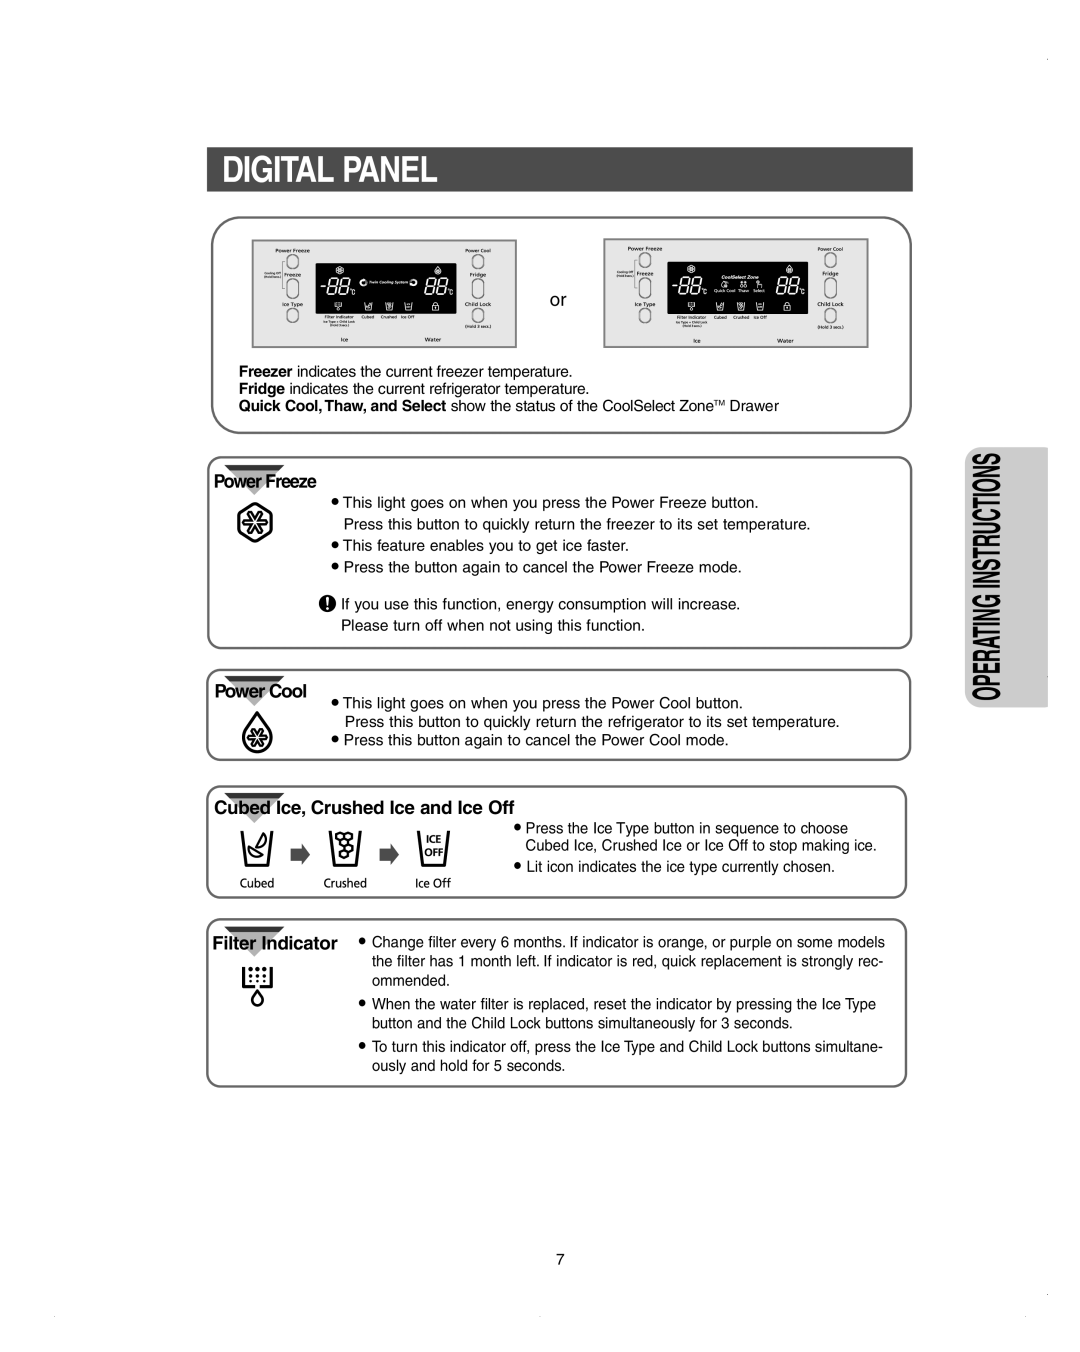 Samsung DA99-01278C Digital Panel, Power Freeze, Power Cool, Cubed Ice, Crushed Ice and Ice Off, Operating Instructions 